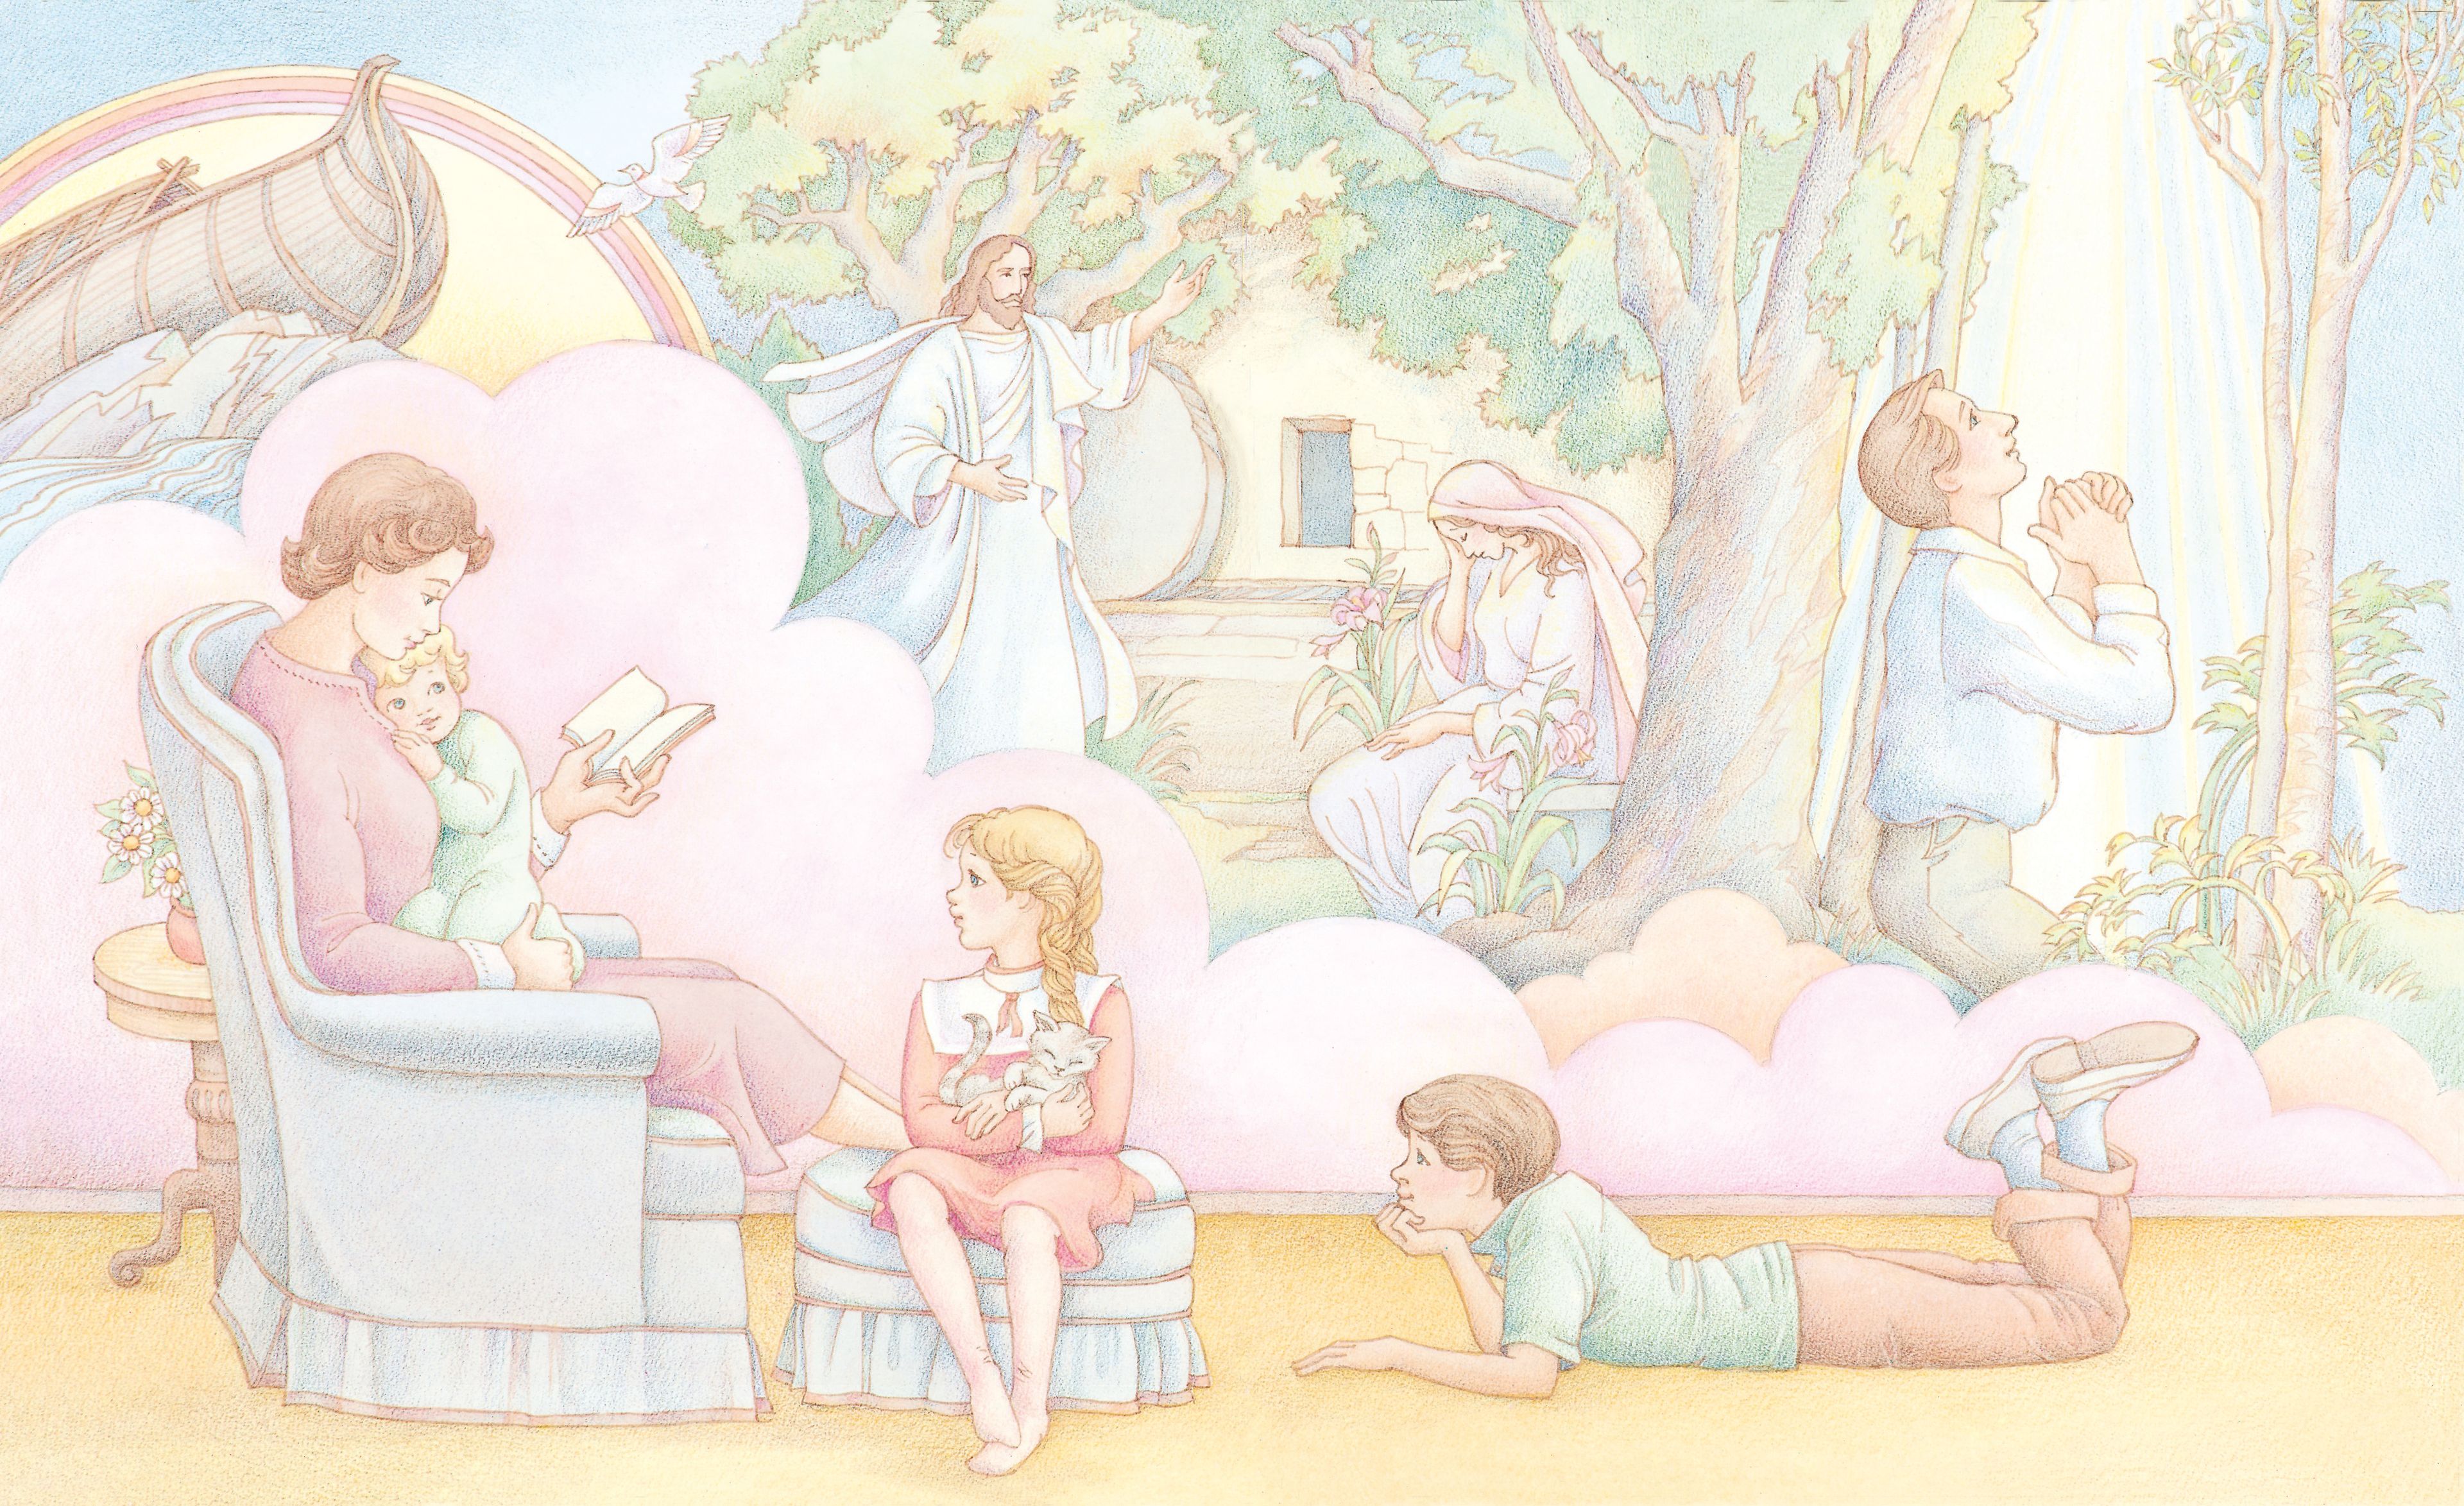 Children imagining the scripture stories that their mother is reading to them. From the section “The Gospel” in the Children’s Songbook, pages 84–85; watercolor illustration by Phyllis Luch.